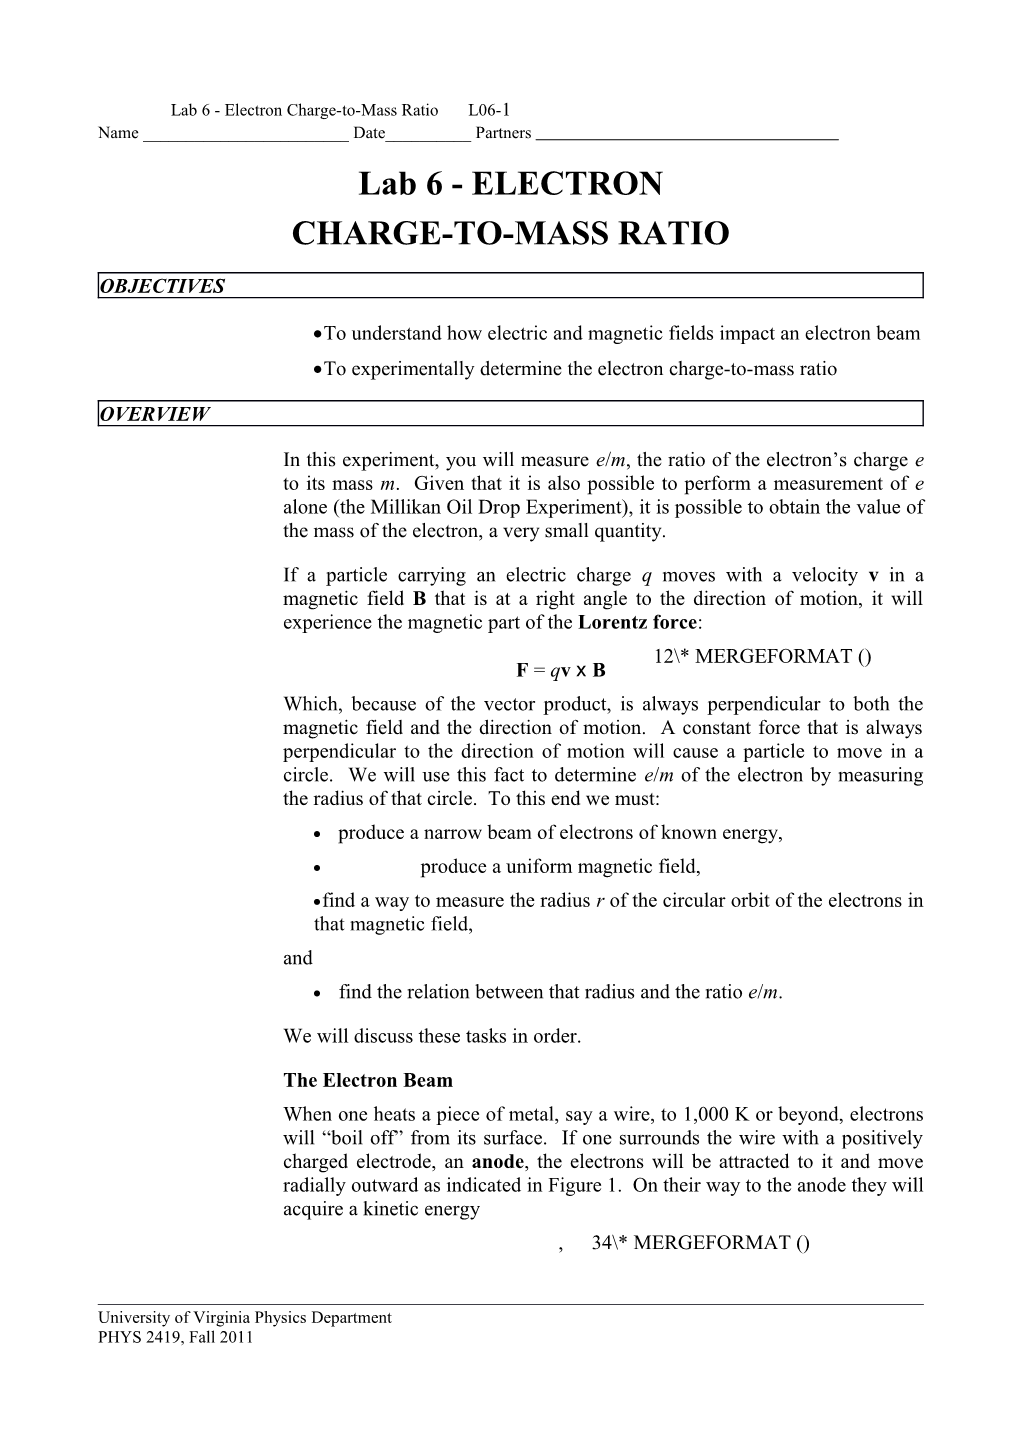 Electron Charge-To-Mass Ratio